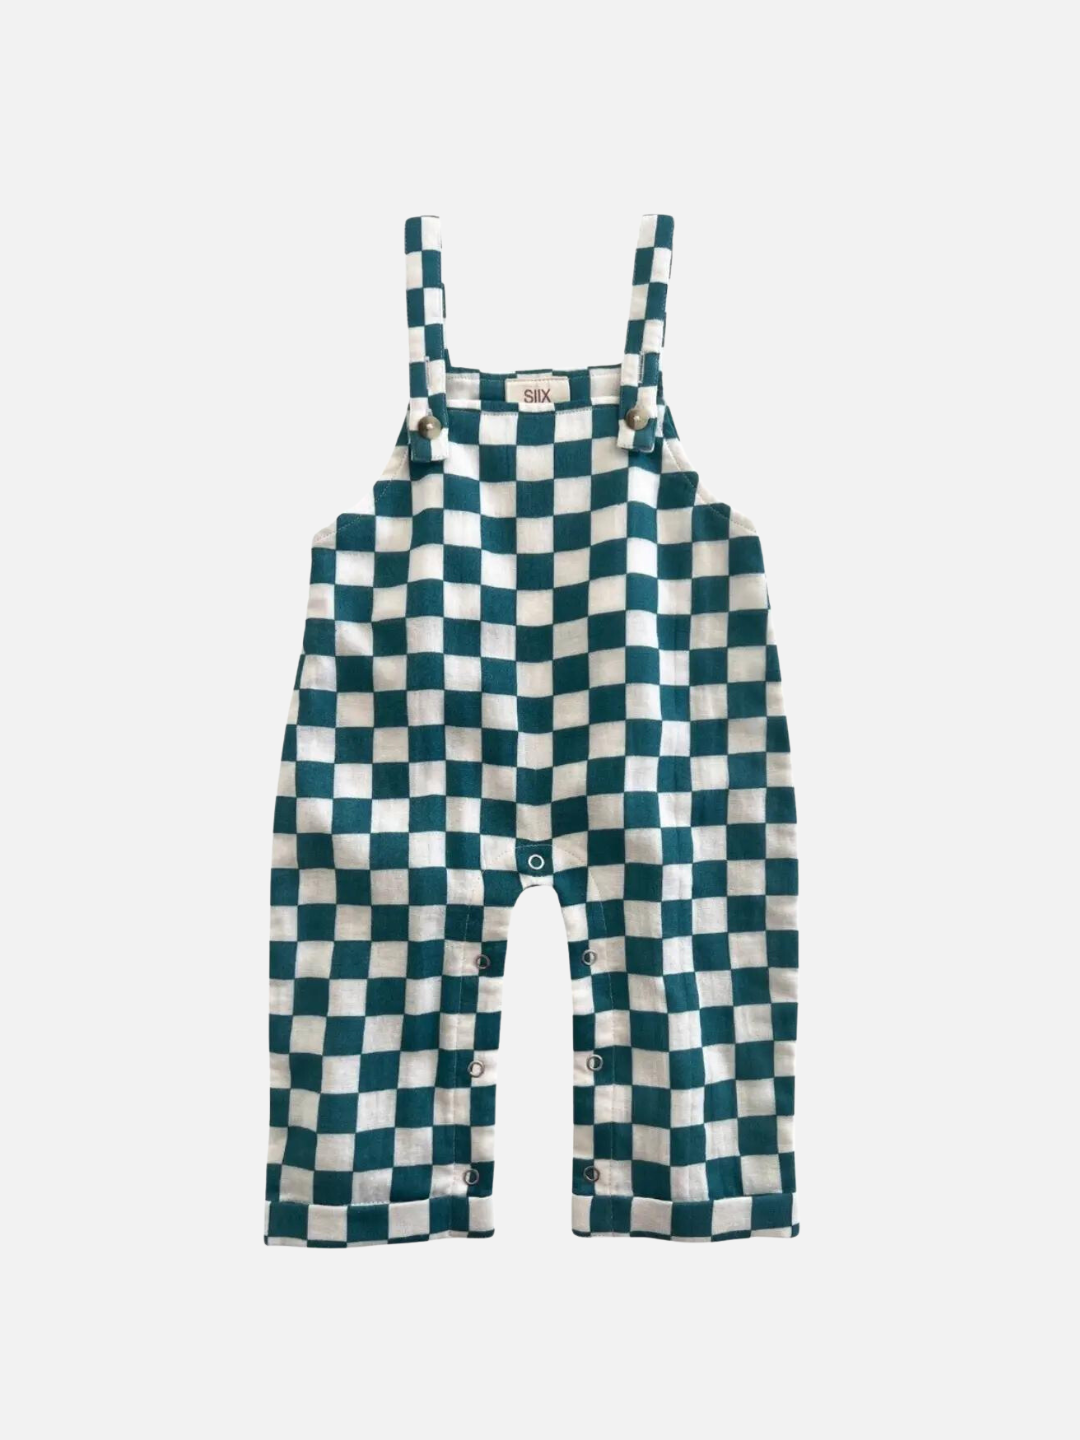 A pair of kids' overalls in an aquamarine and white check